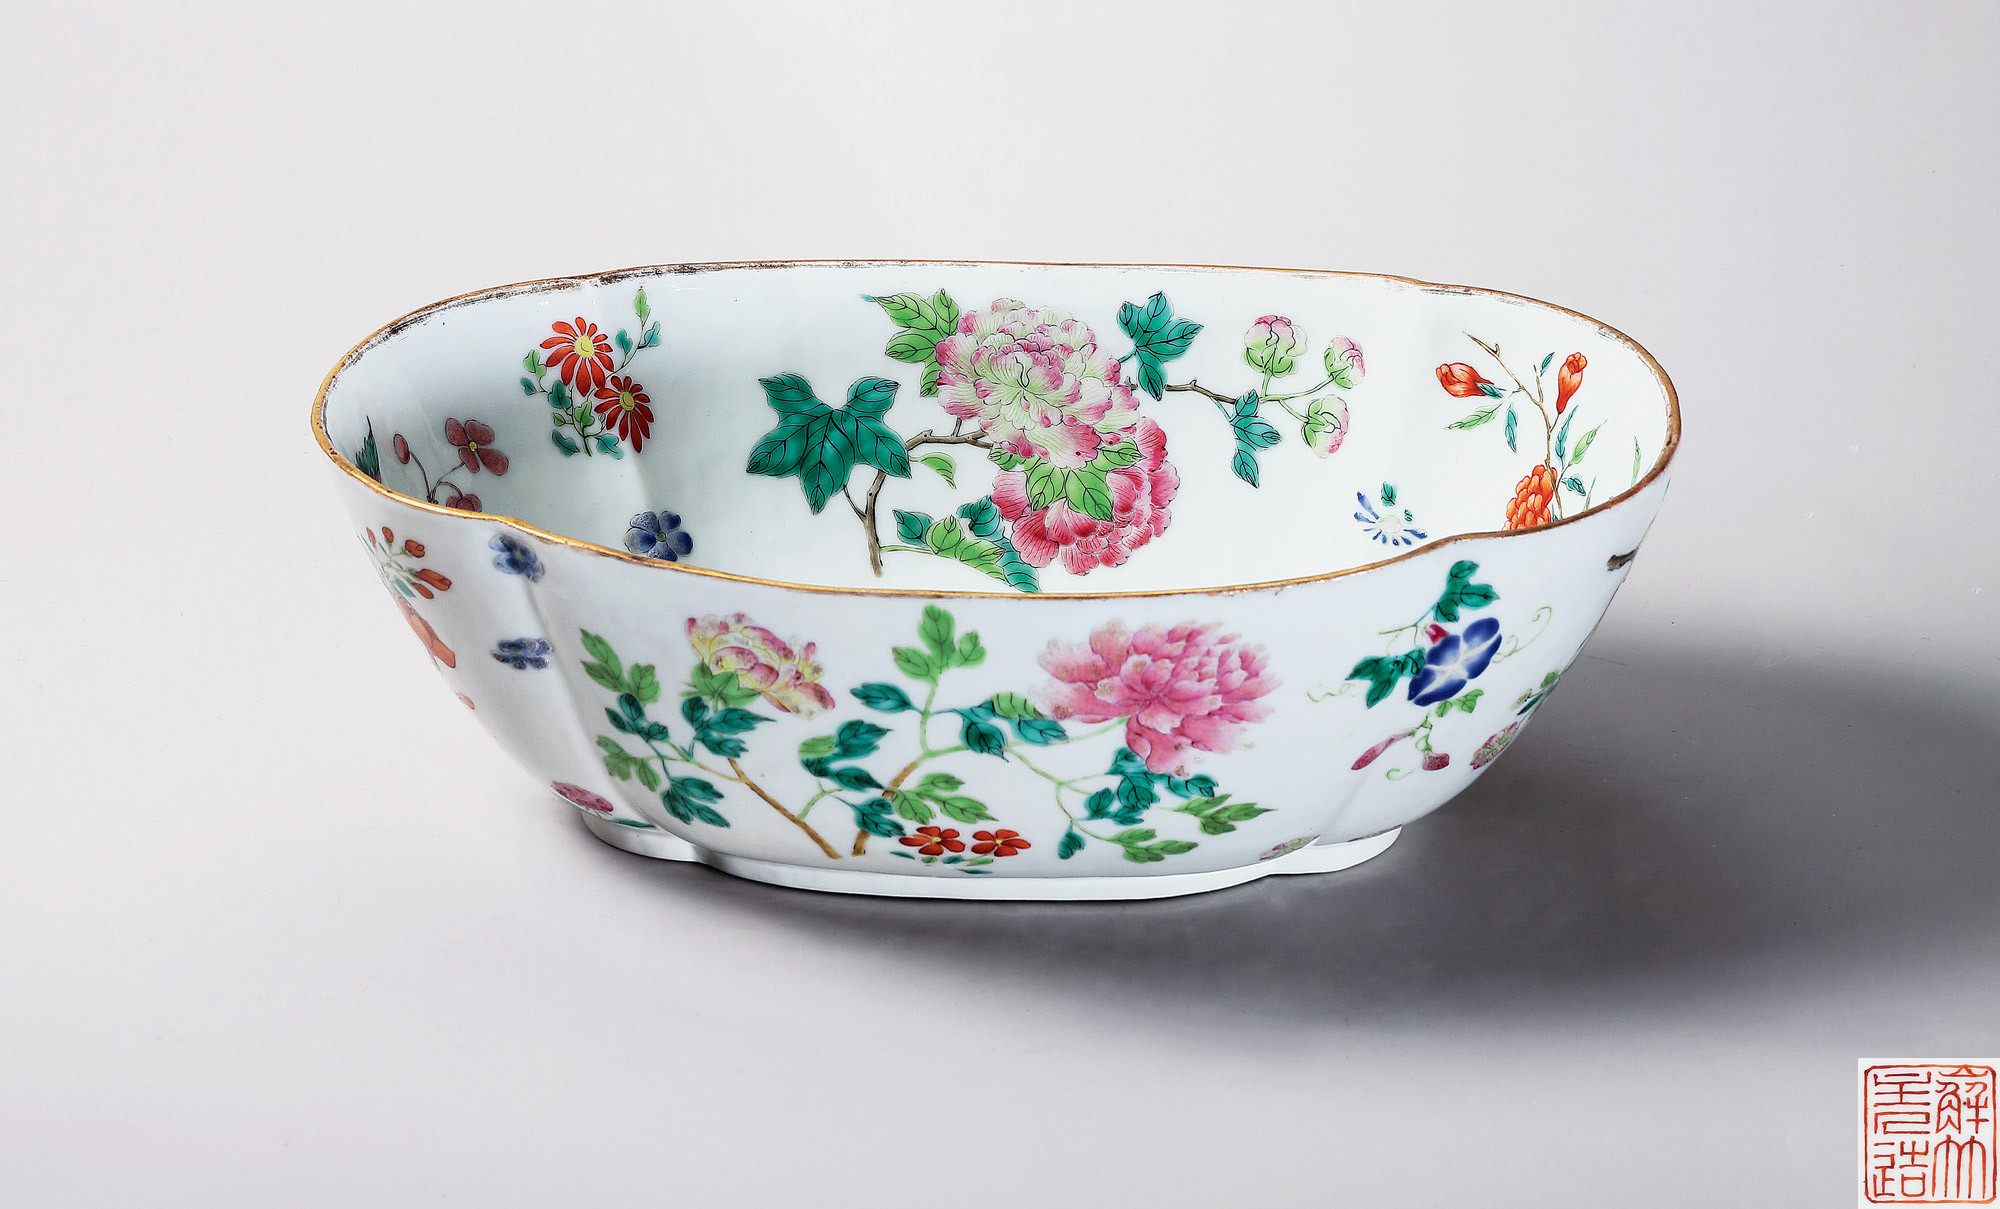 A RARE FAMILLE-ROSE FLORAL-SHAPED WASHER